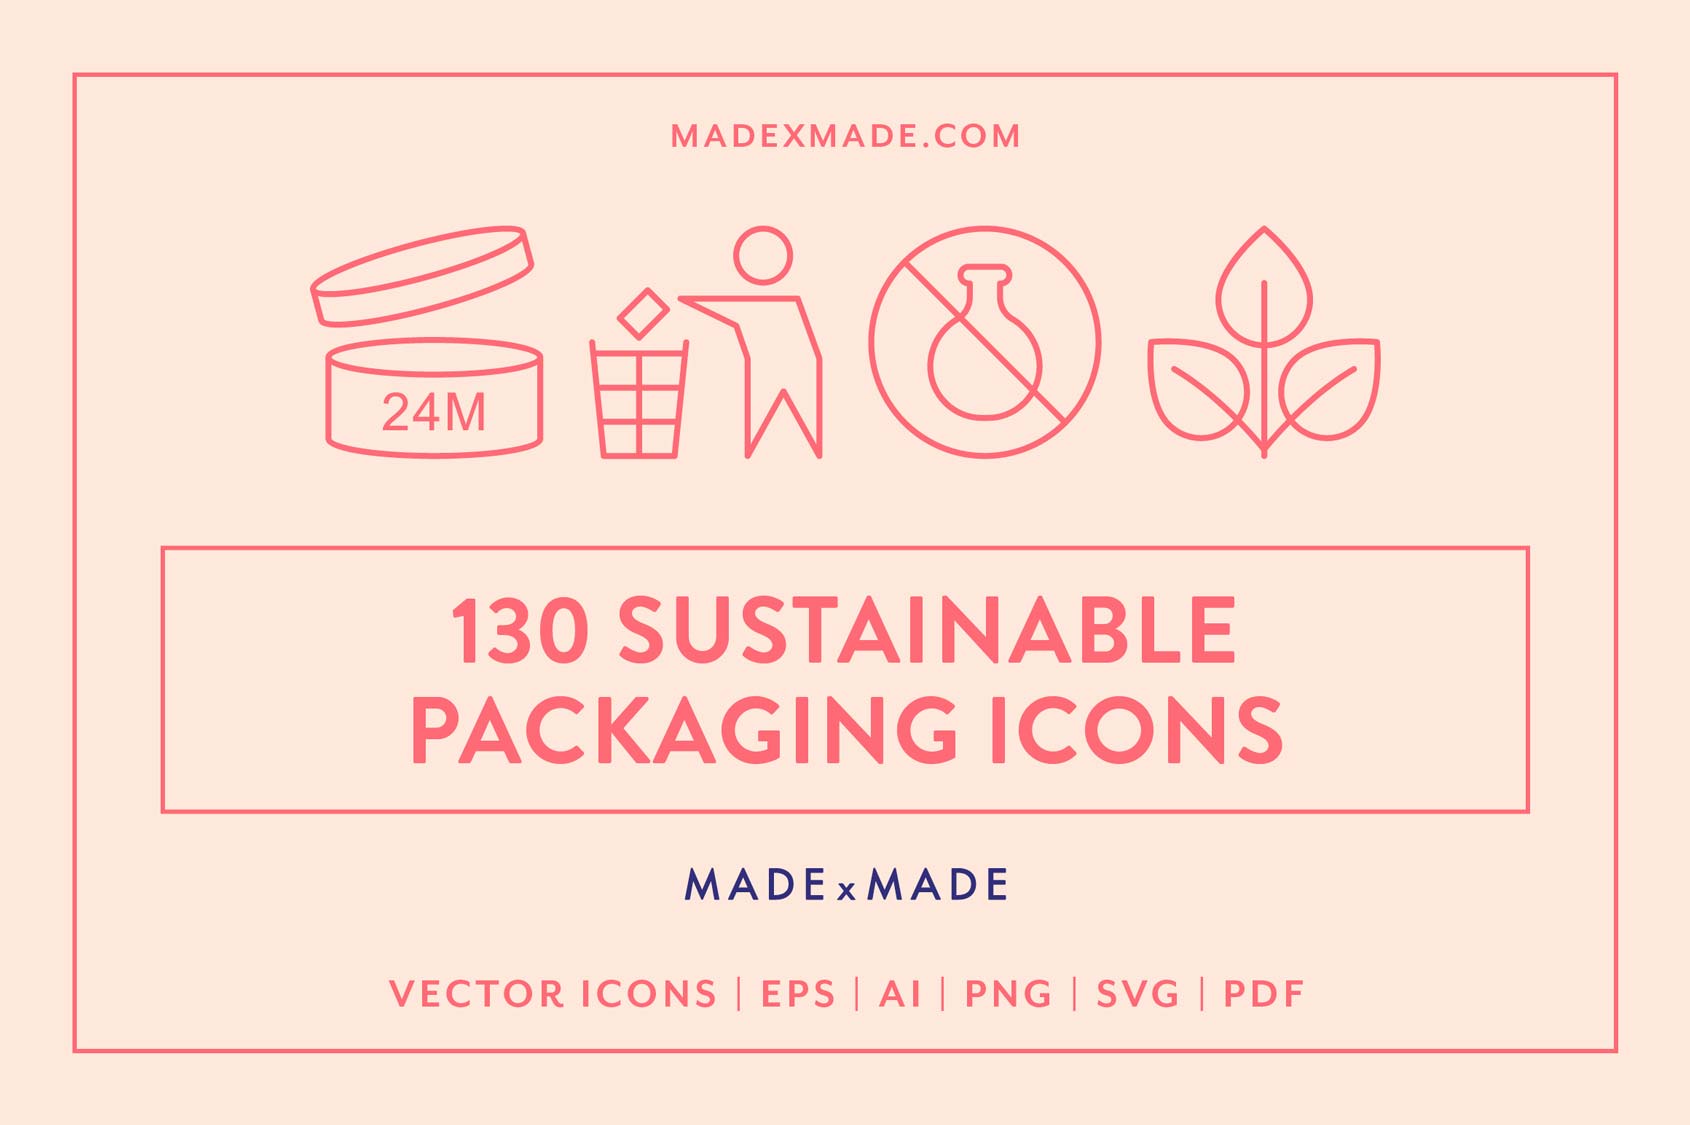 made x made icons sustainable packaging cover – consistent icons and symbols for eco-packaging, biodegradable, natural, vegan, plant based, organic, reusable, free from, recycling, mandatories